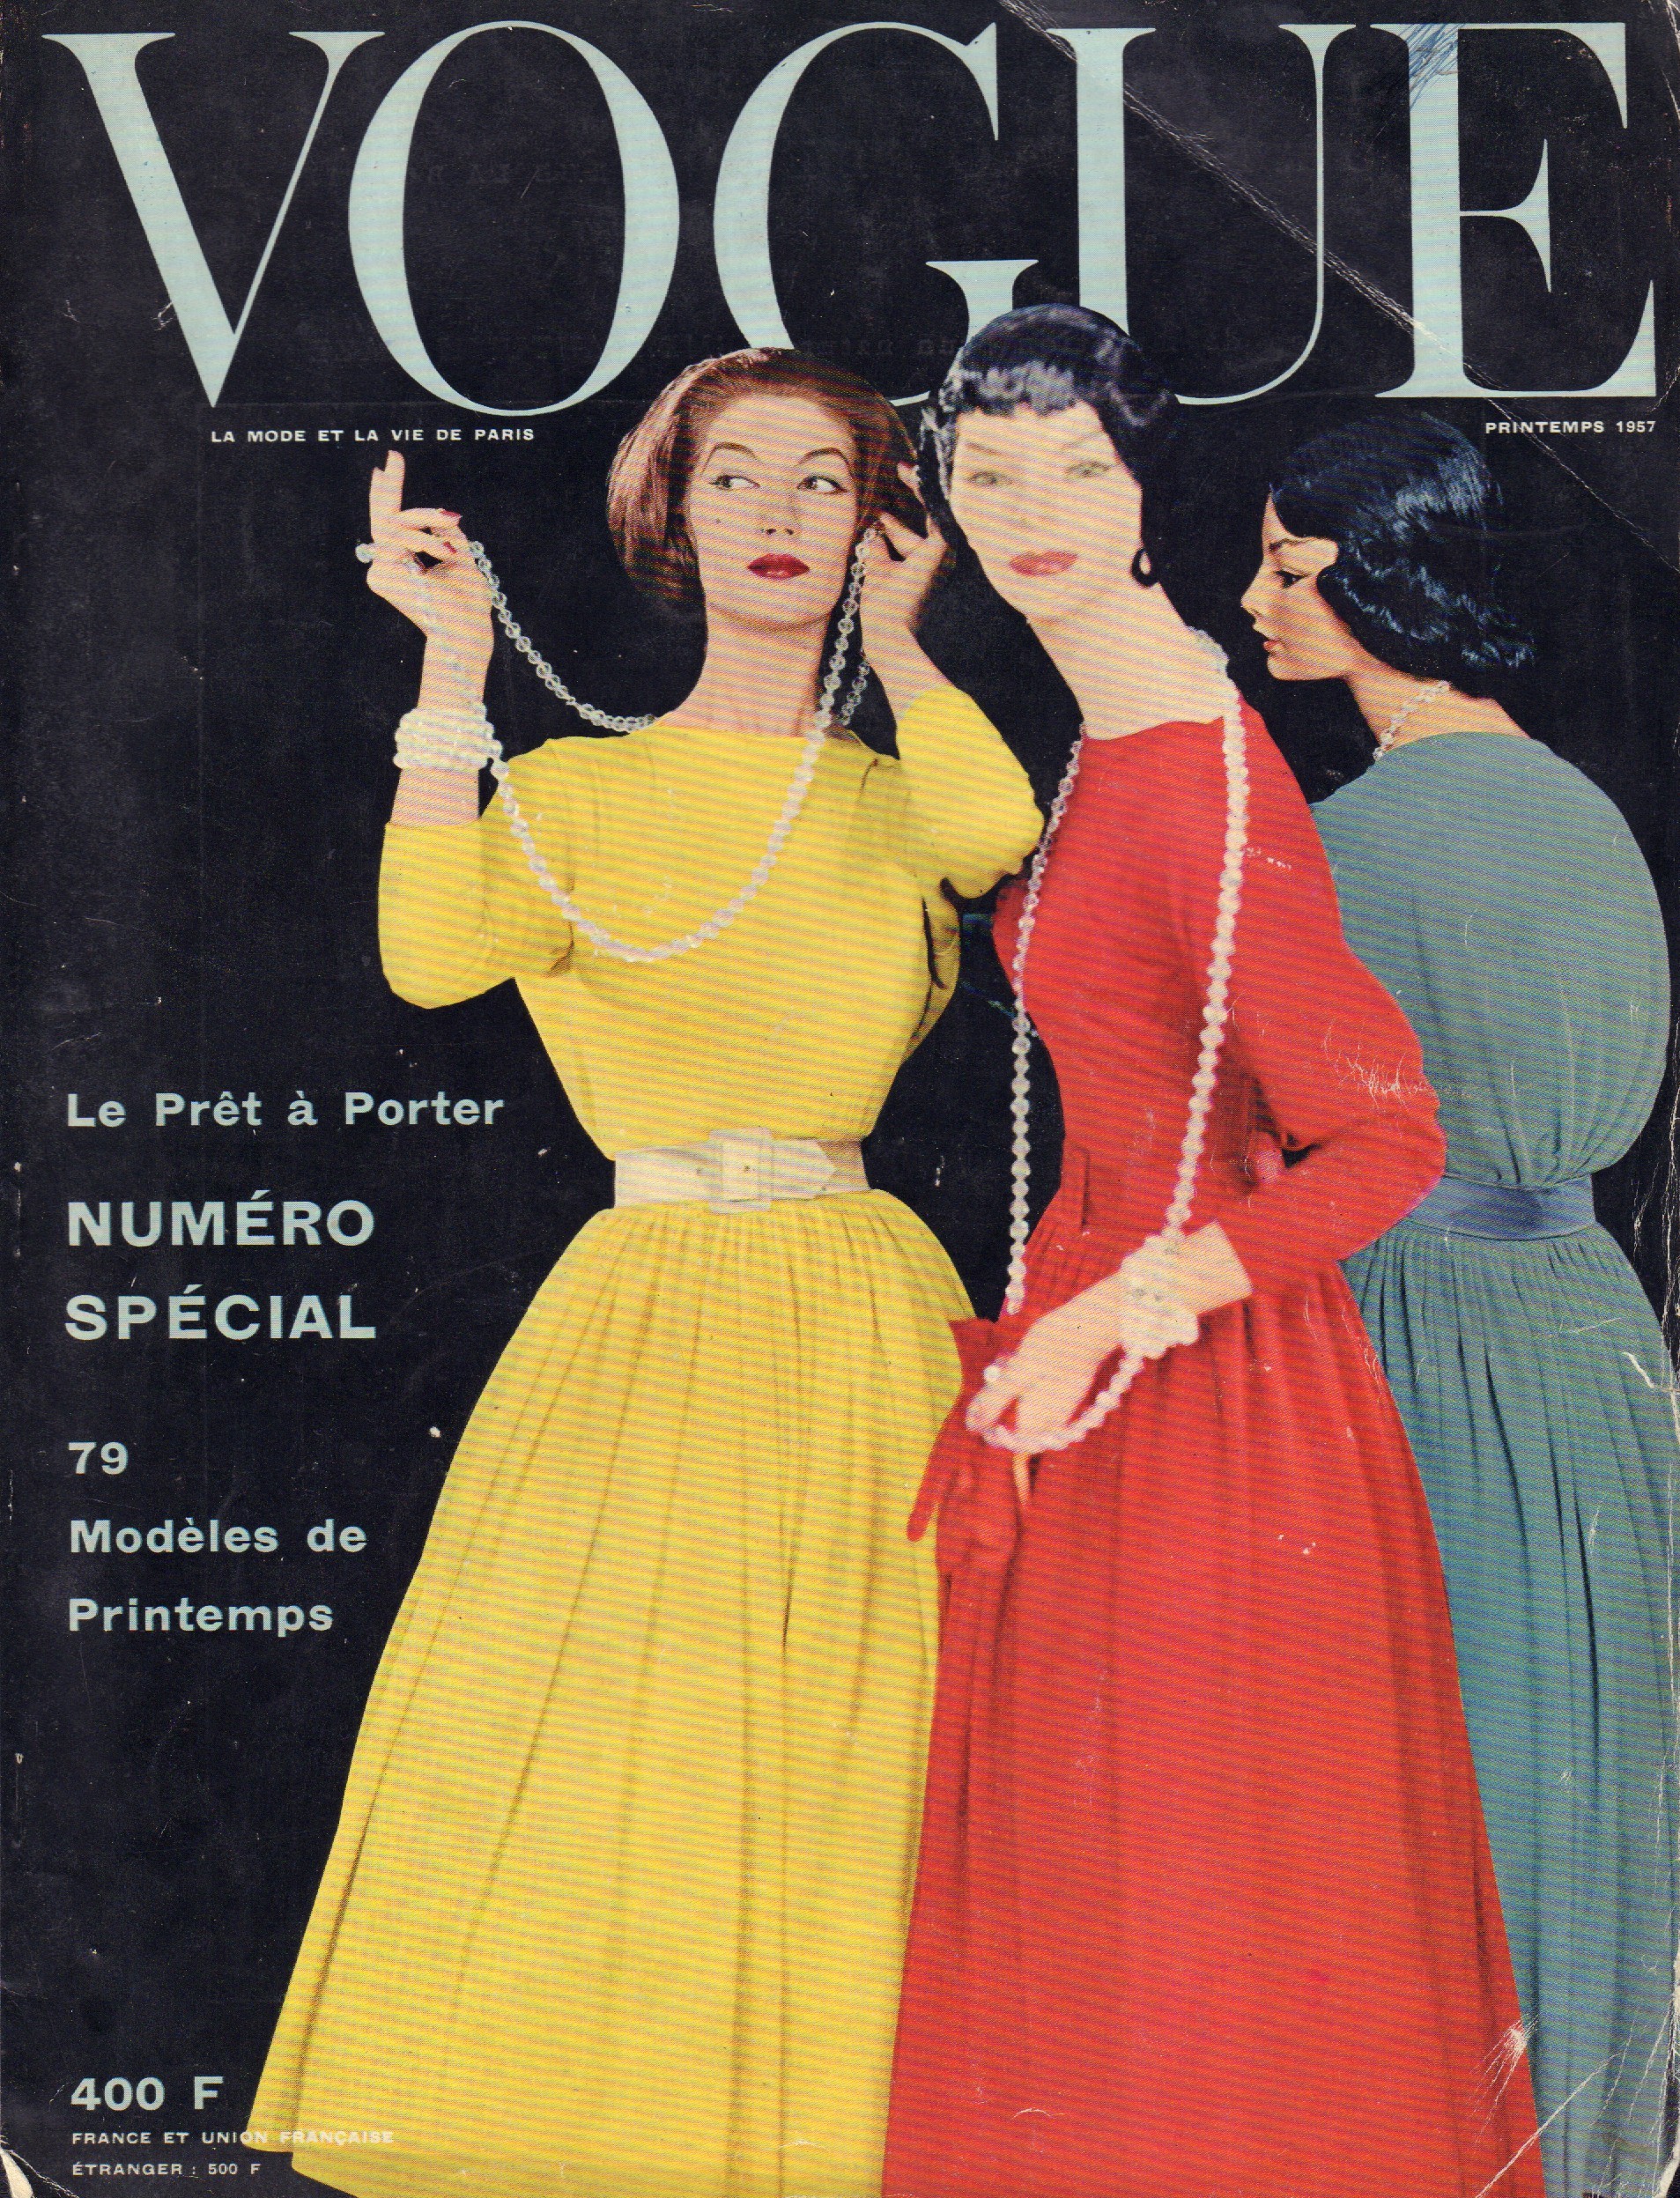 Image for Vogue Fevrier 1957 - French edition (February)